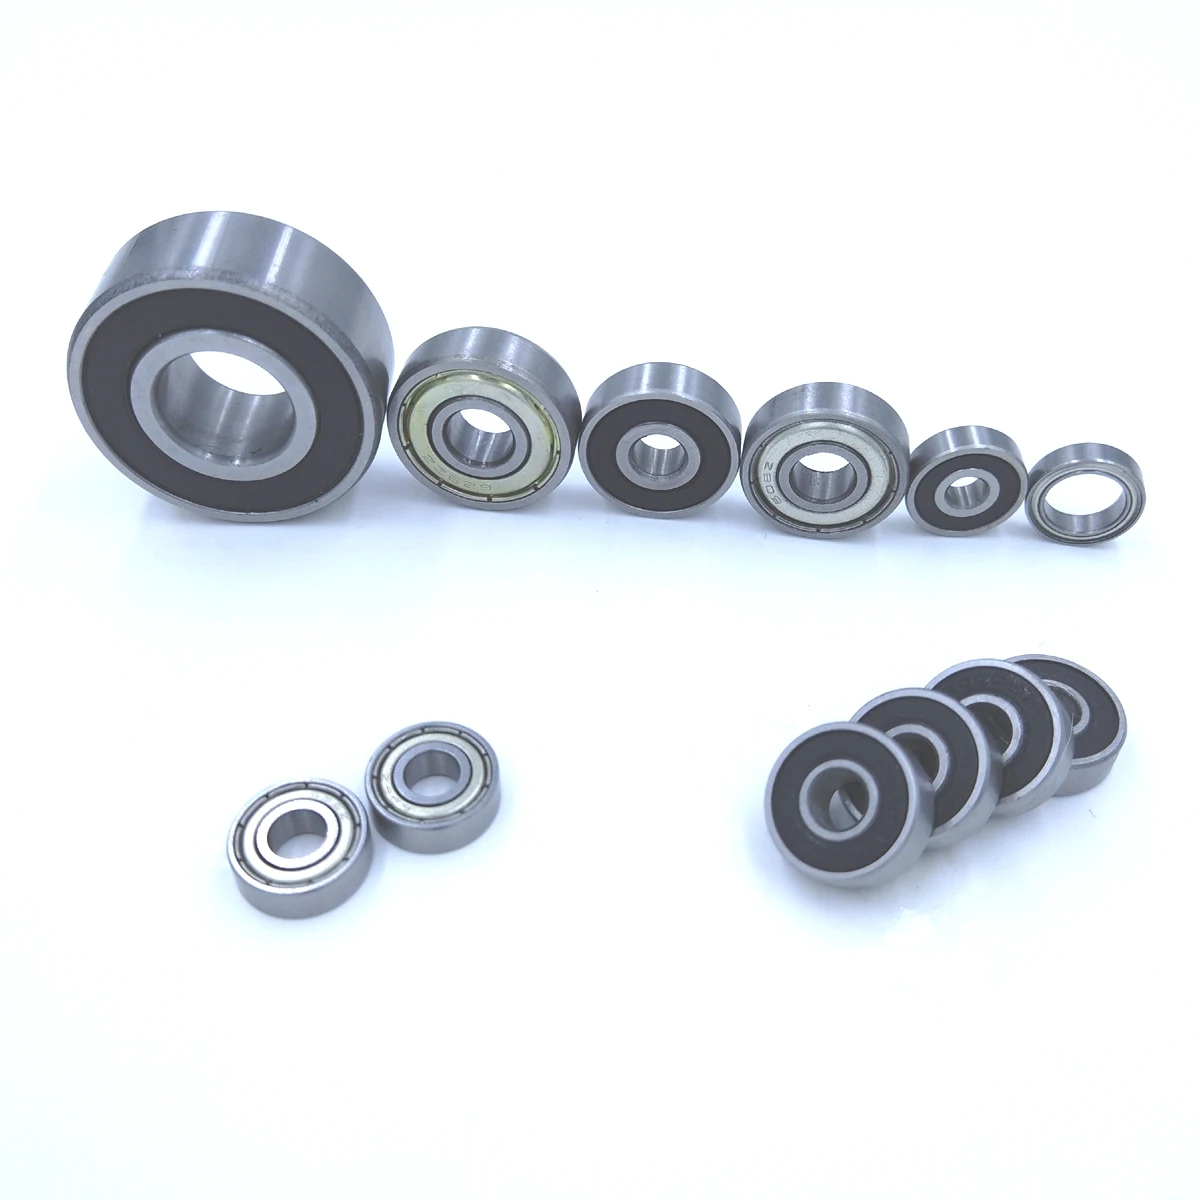 10Pcs 1Lot 635 635ZZ 635RS 635-2Z 635Z 635-2RS ZZ RS RZ 2RZ Deep Groove Ball Bearings 5 x 19 x 6mm durable in use functional